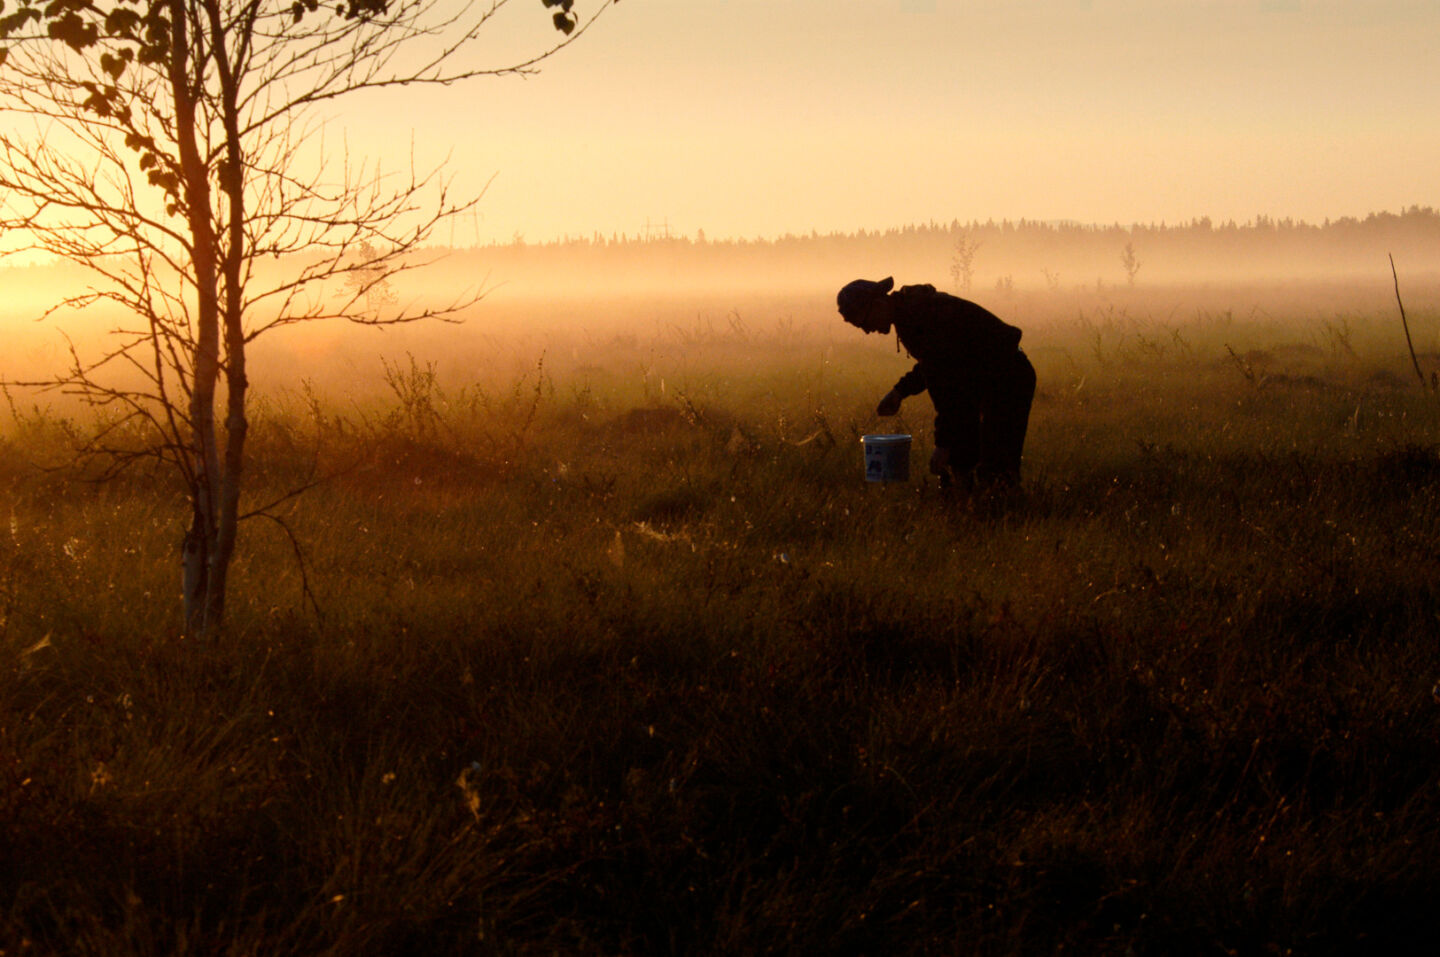 Berry picking in Tervola, a filming location in Finnish Lapland